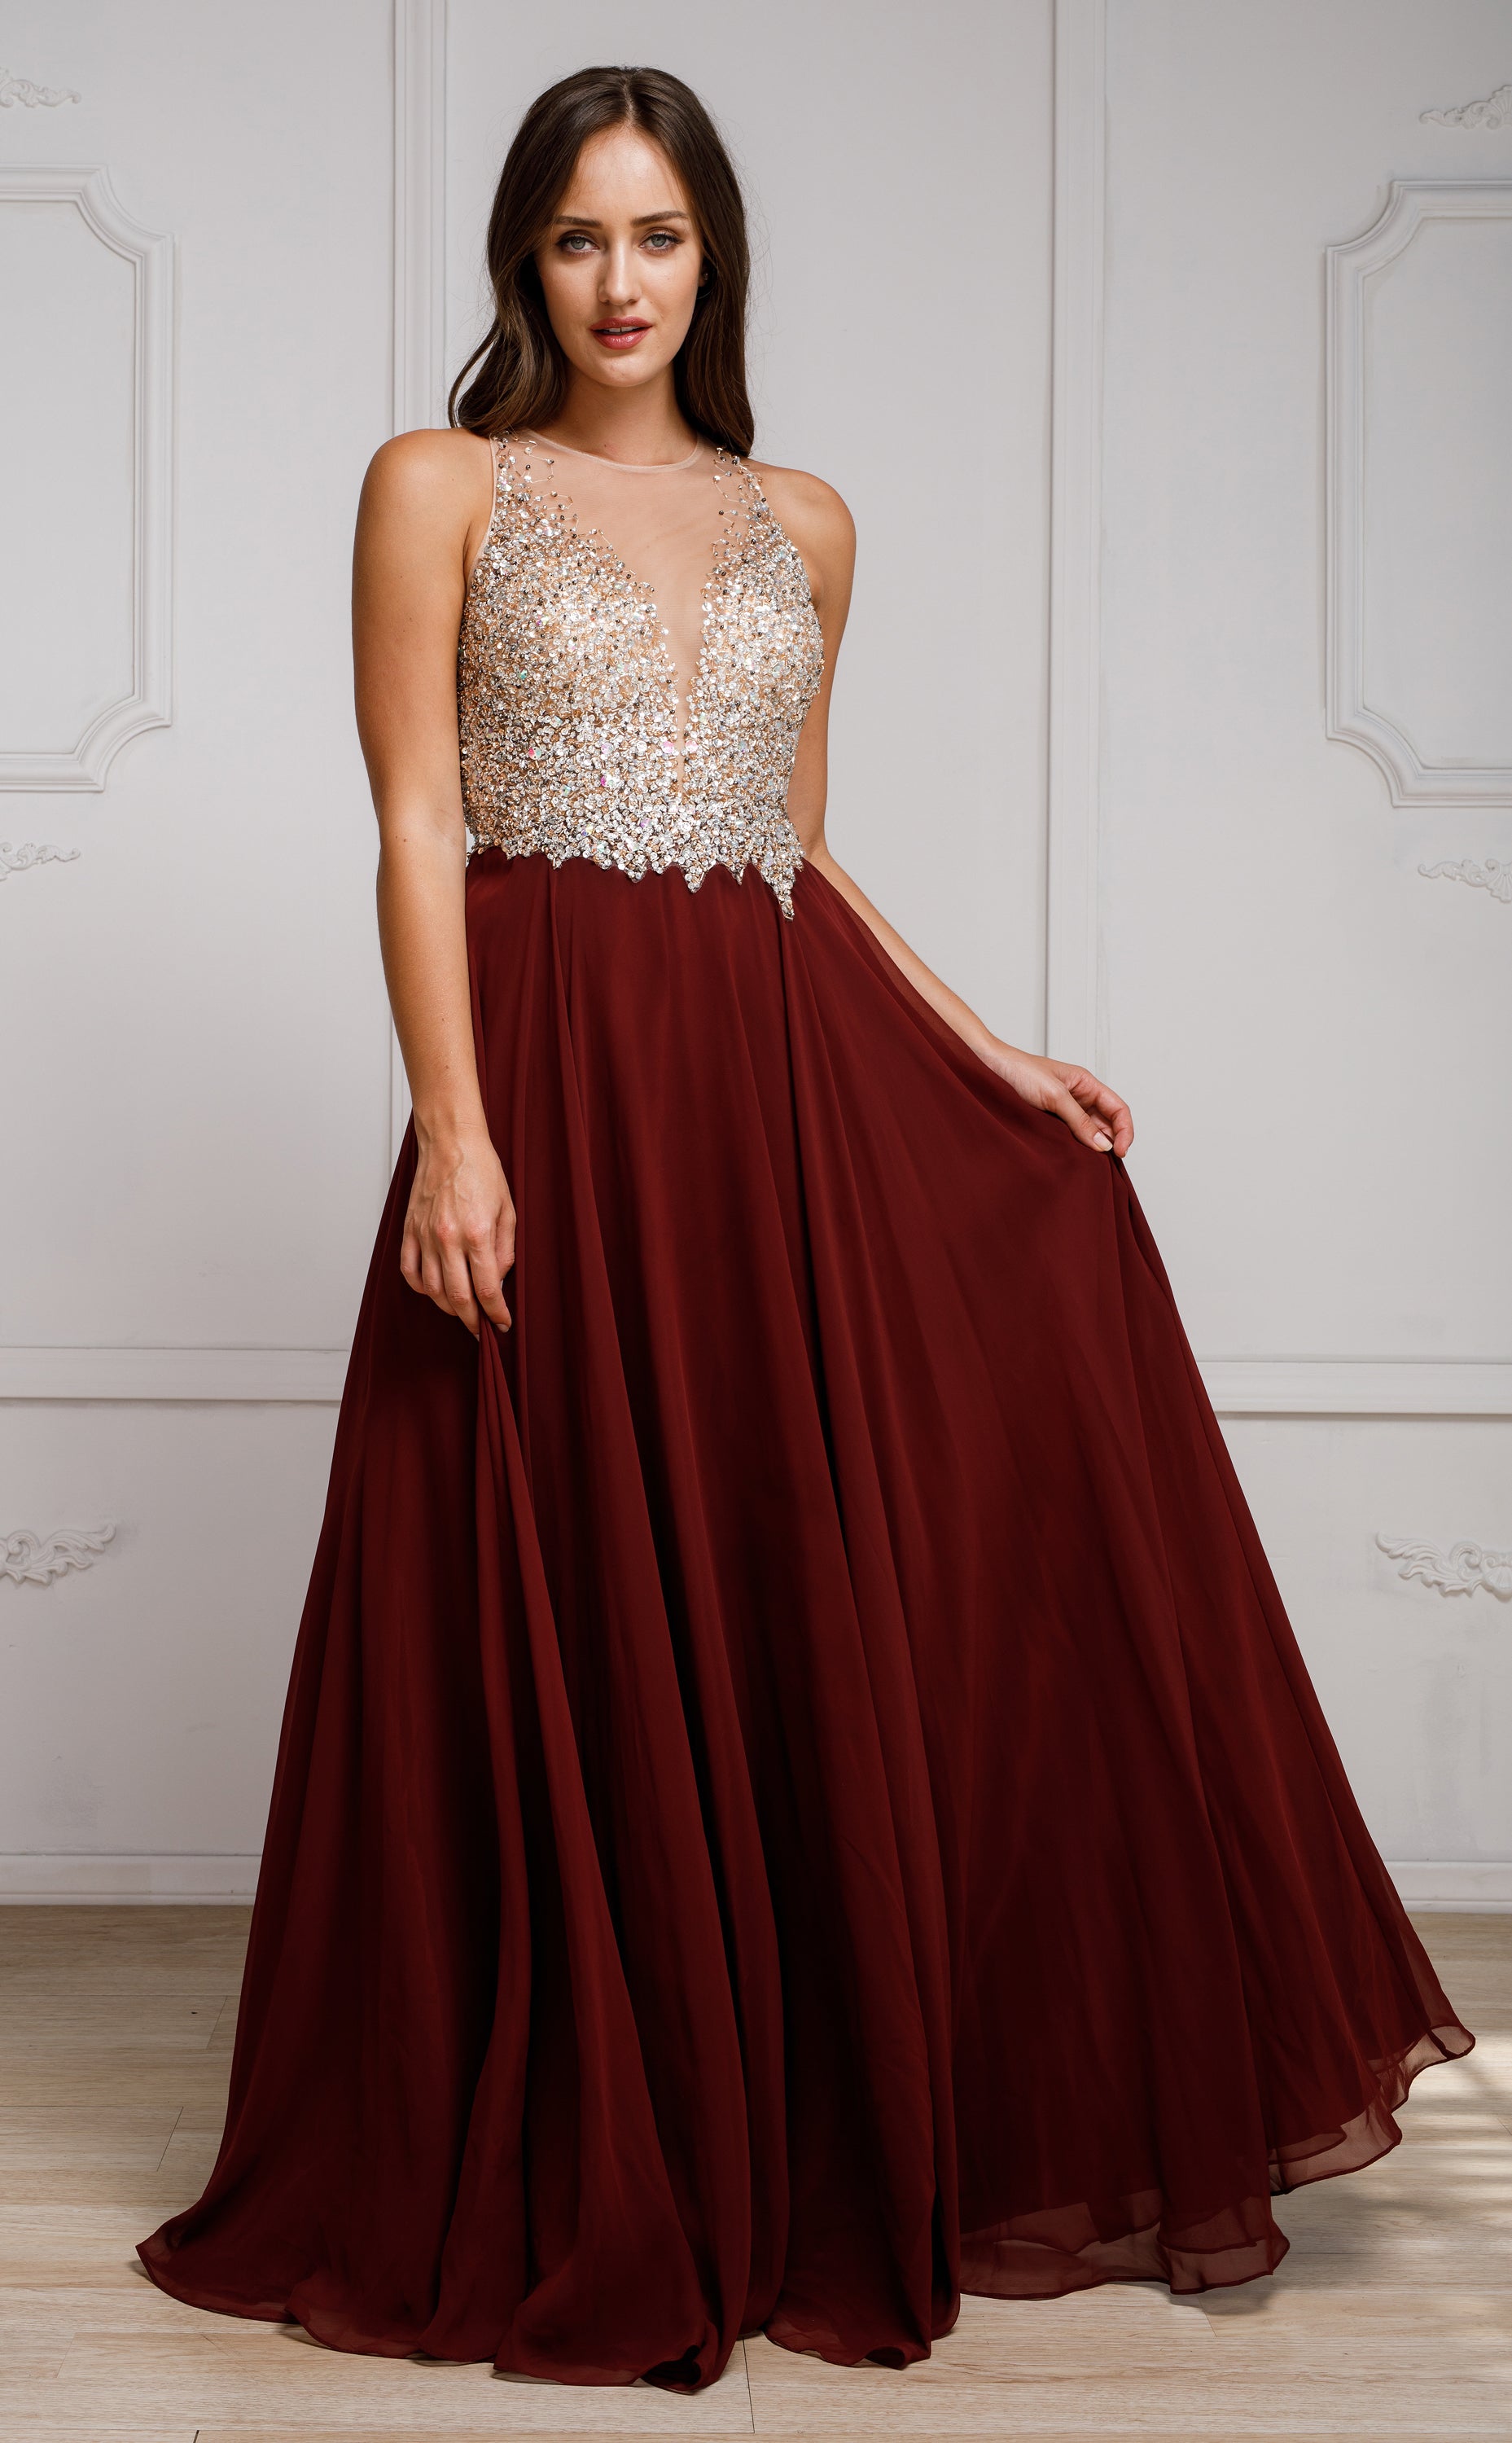 Image of Sequined Plunging Neckine Prom Gown in Burgundy